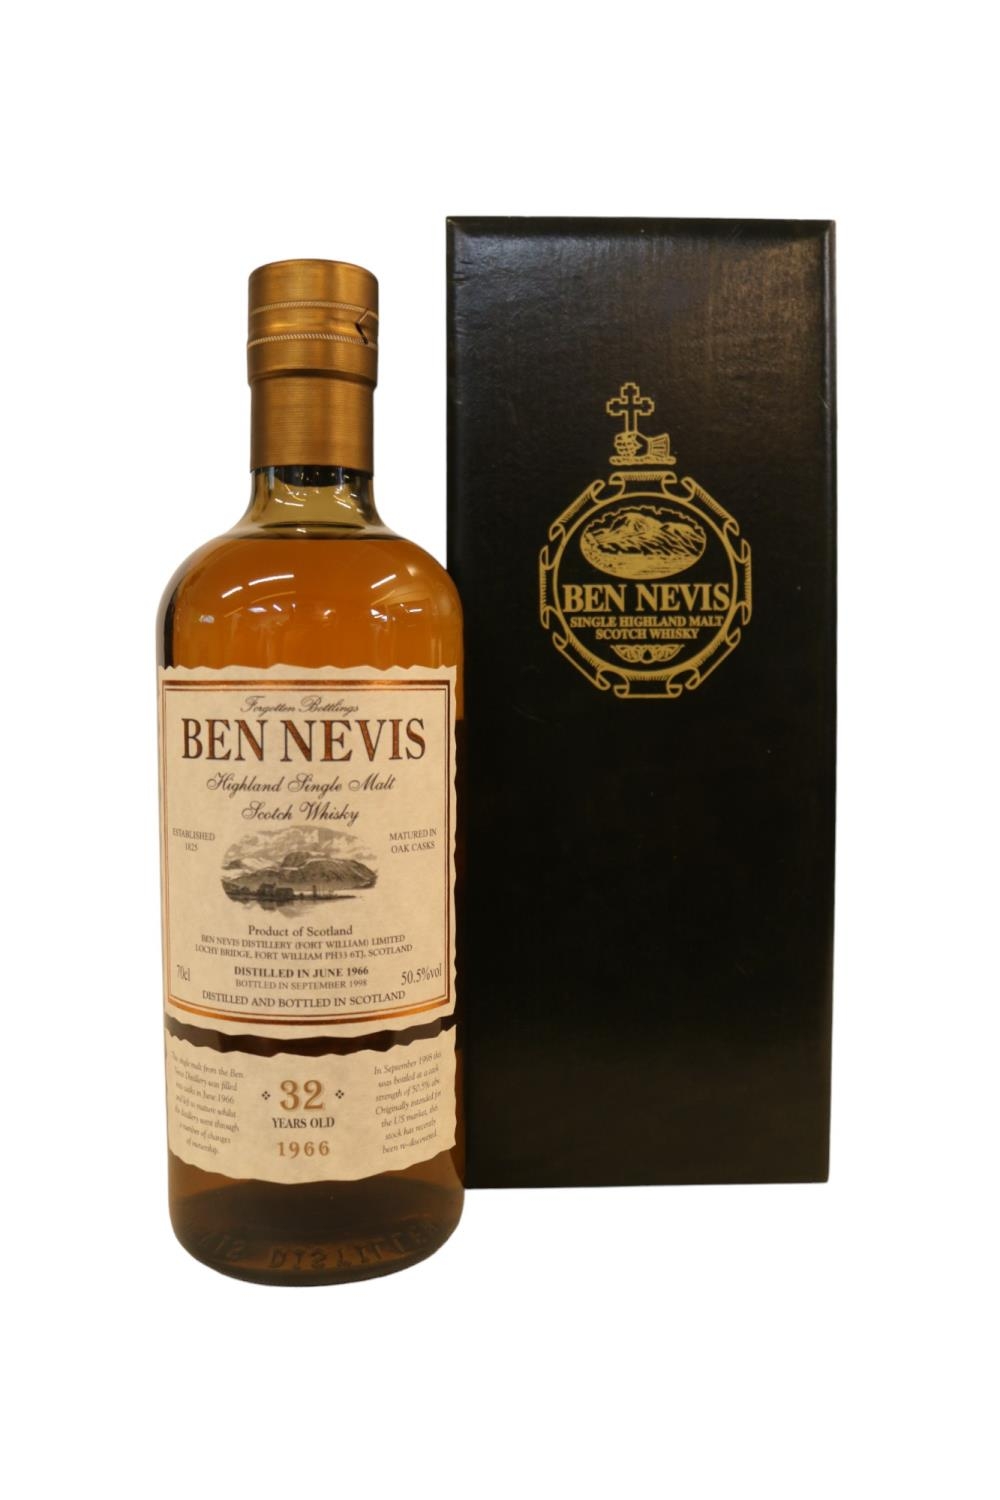 Ben Nevis Highland Single Malt Scotch Whisky 32 Year Old 1966 70cl boxed dated 1966 50.5% Vol